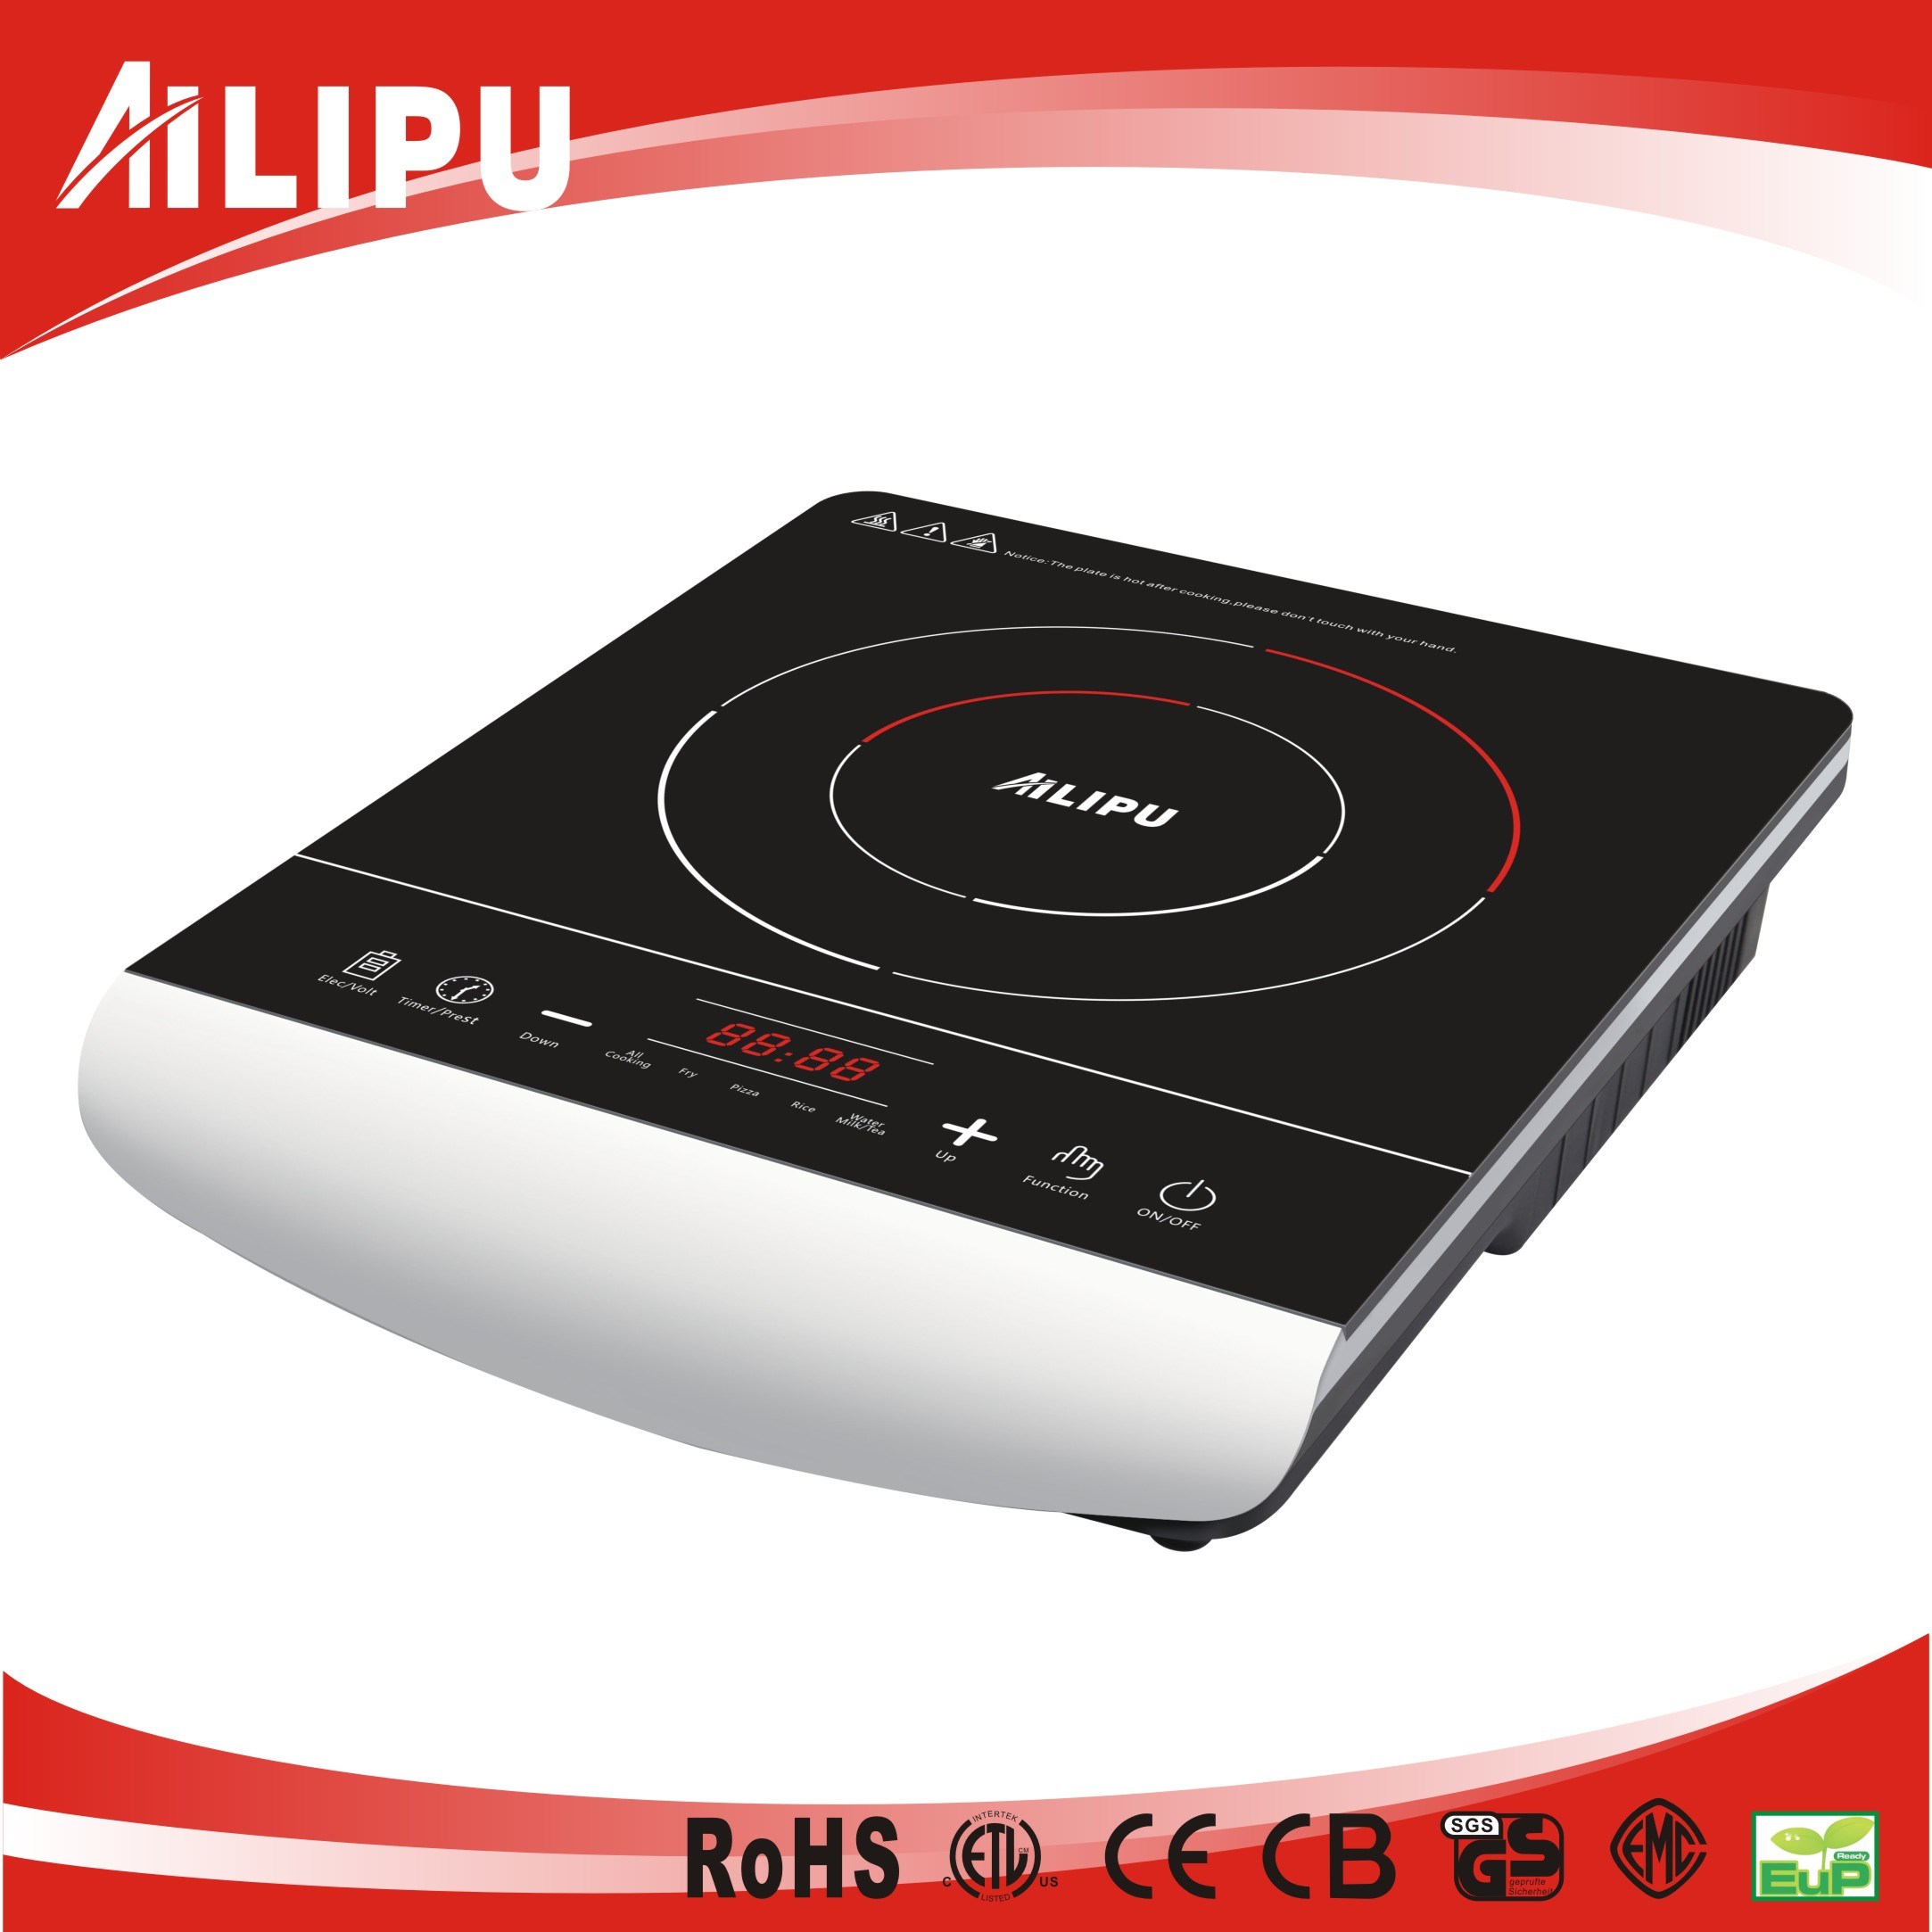 Simple Model Countertop Style Touch Sensor Electric Induction Cooker